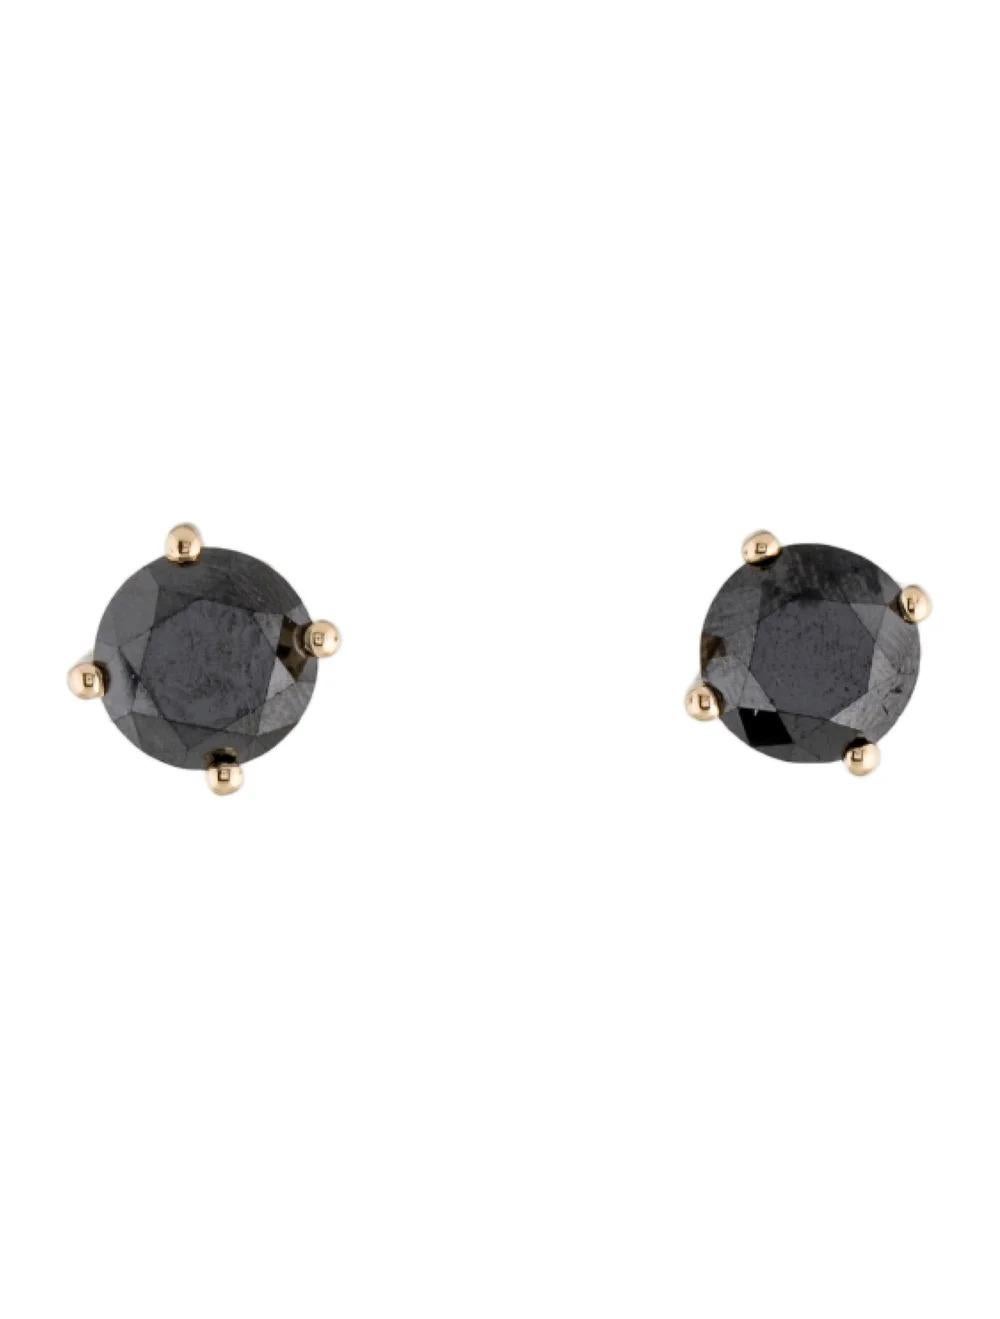 Indulge in luxury with these exquisite 14K Yellow Gold Diamond Stud Earrings. Crafted to perfection, these earrings feature stunning round brilliant diamonds that radiate elegance and sophistication.

Specifications:

* Material: 14K Yellow Gold
*